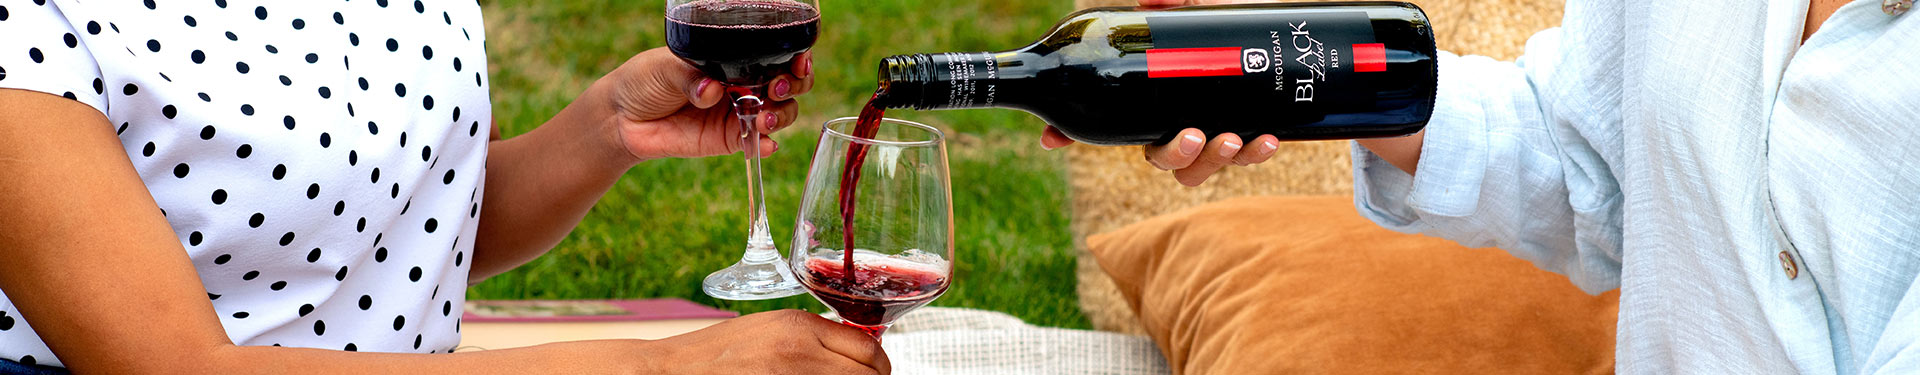 Two women enjoying a bottle of Black Label Red in a picnic setting.